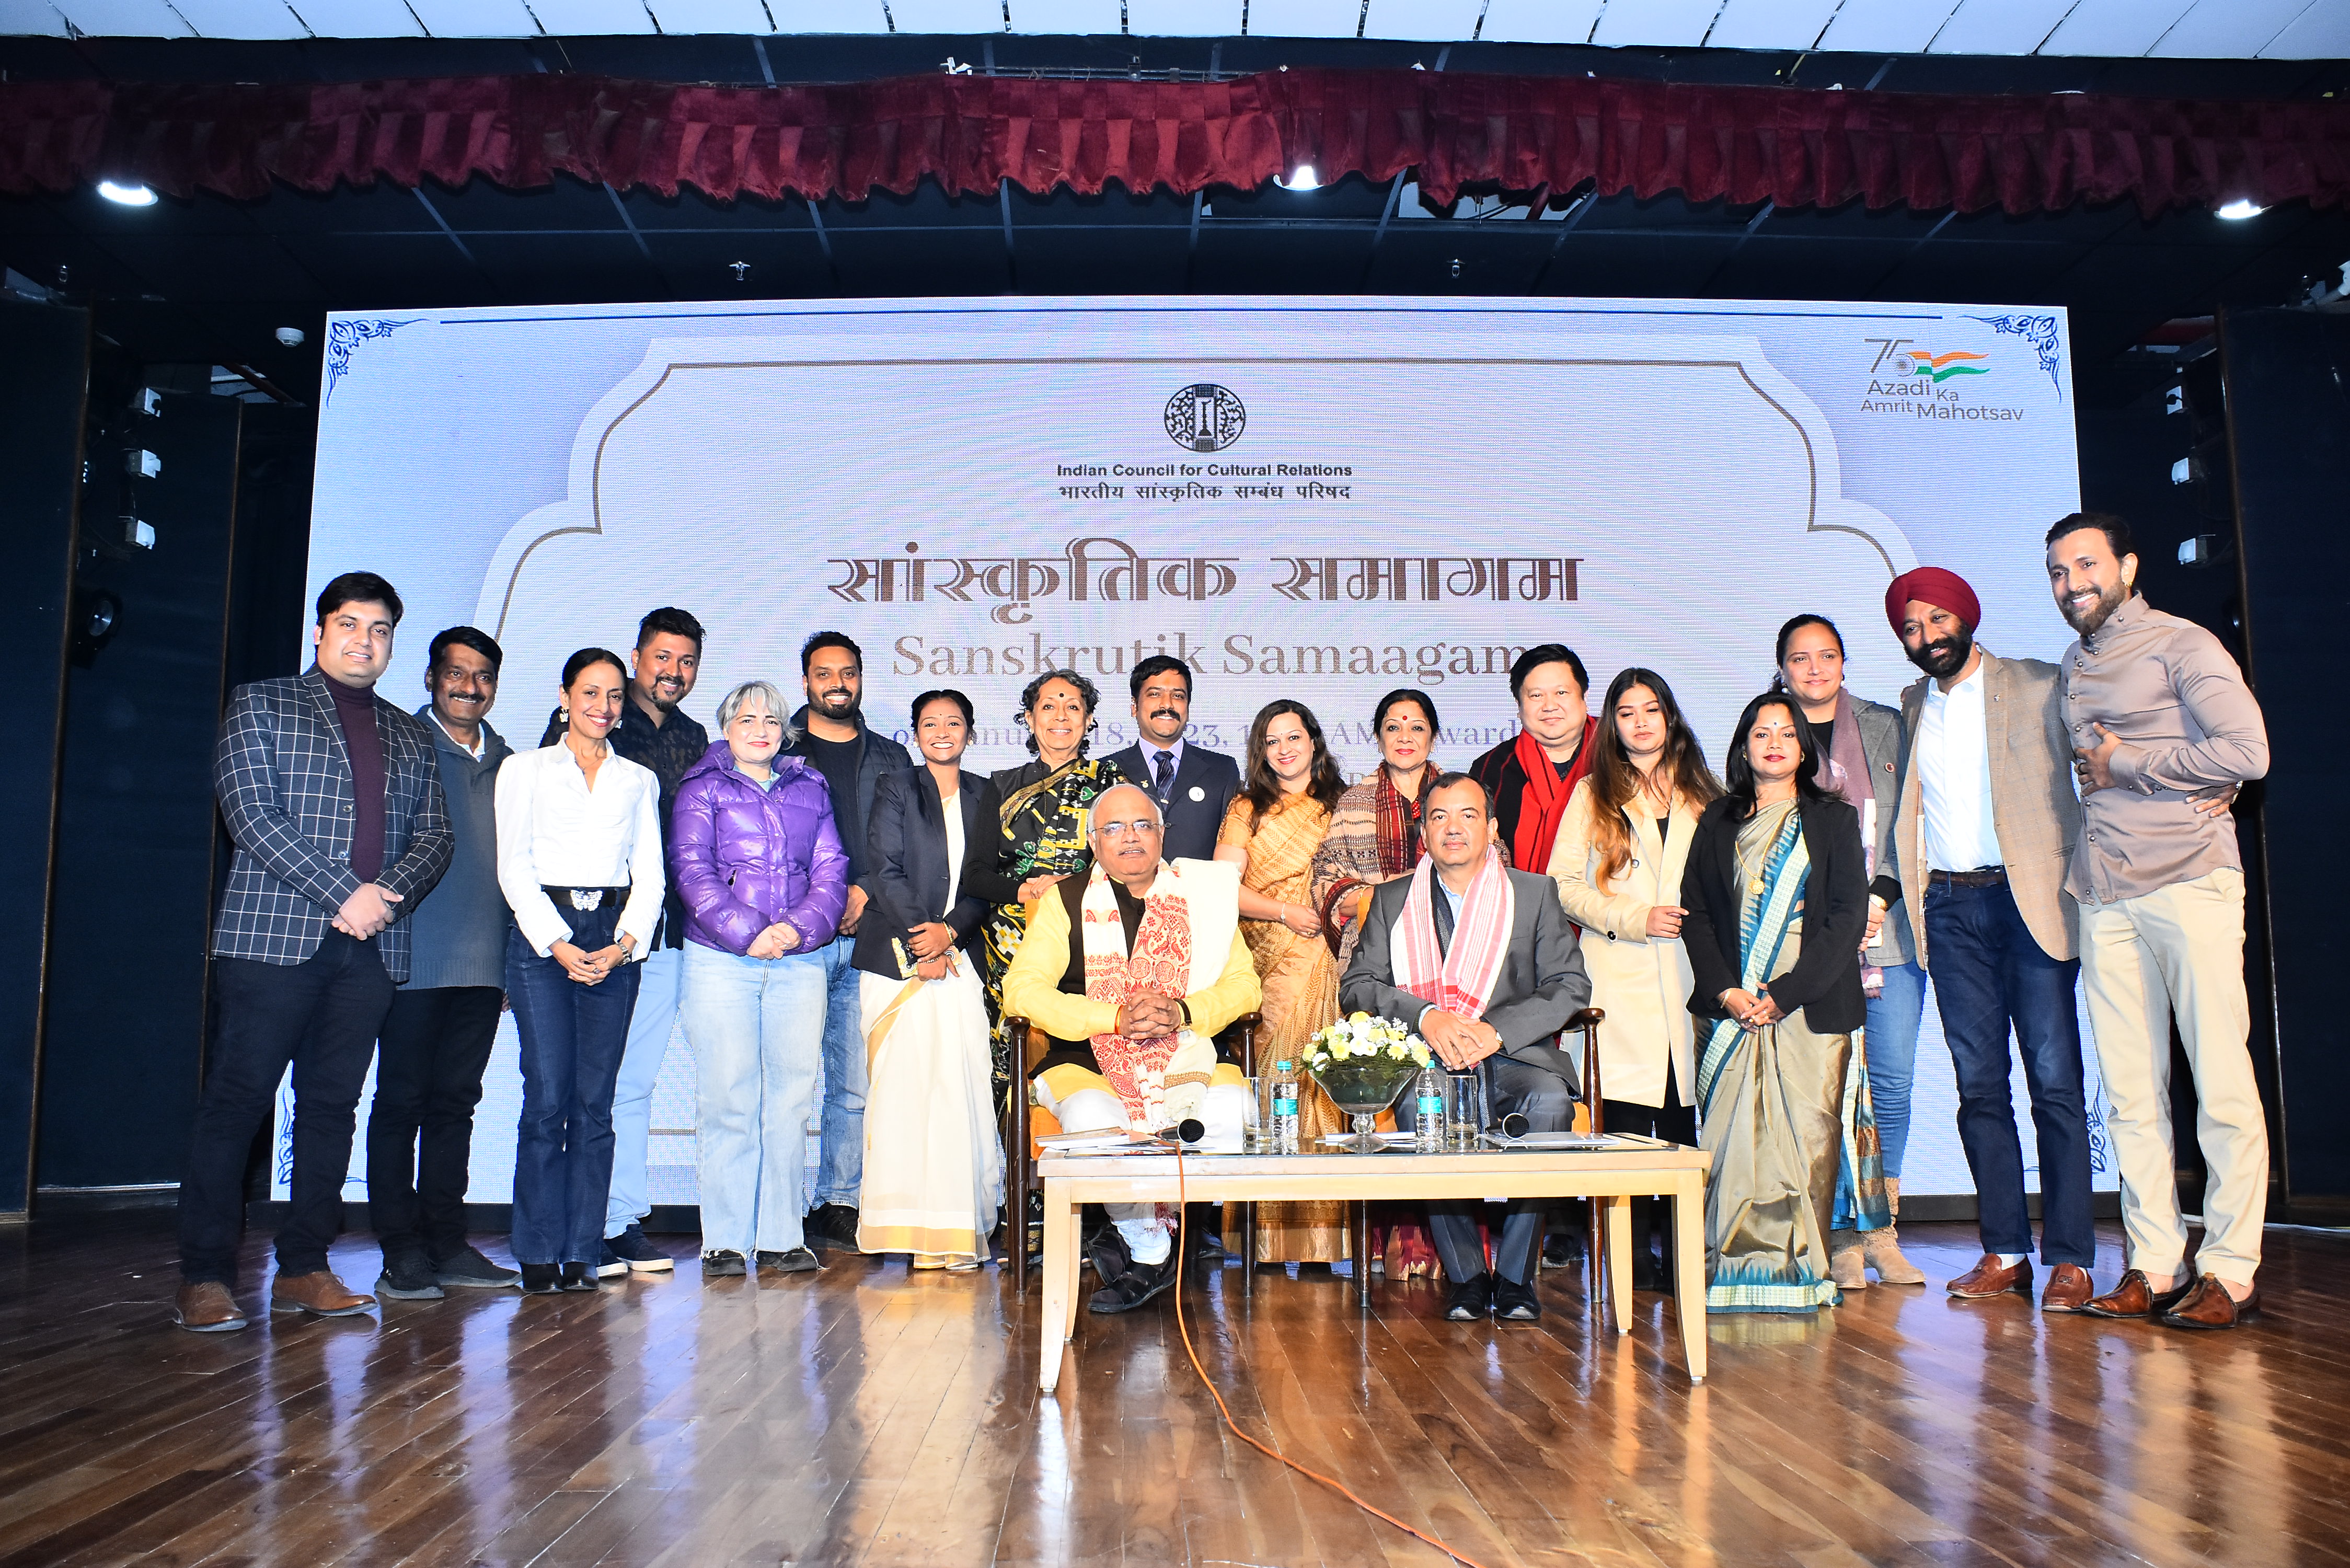 Sanskrutik Samagam, an interactive dialogue session with the group leaders and artists representing different art forms was organised at ICCR headquarters on 18th January 2023